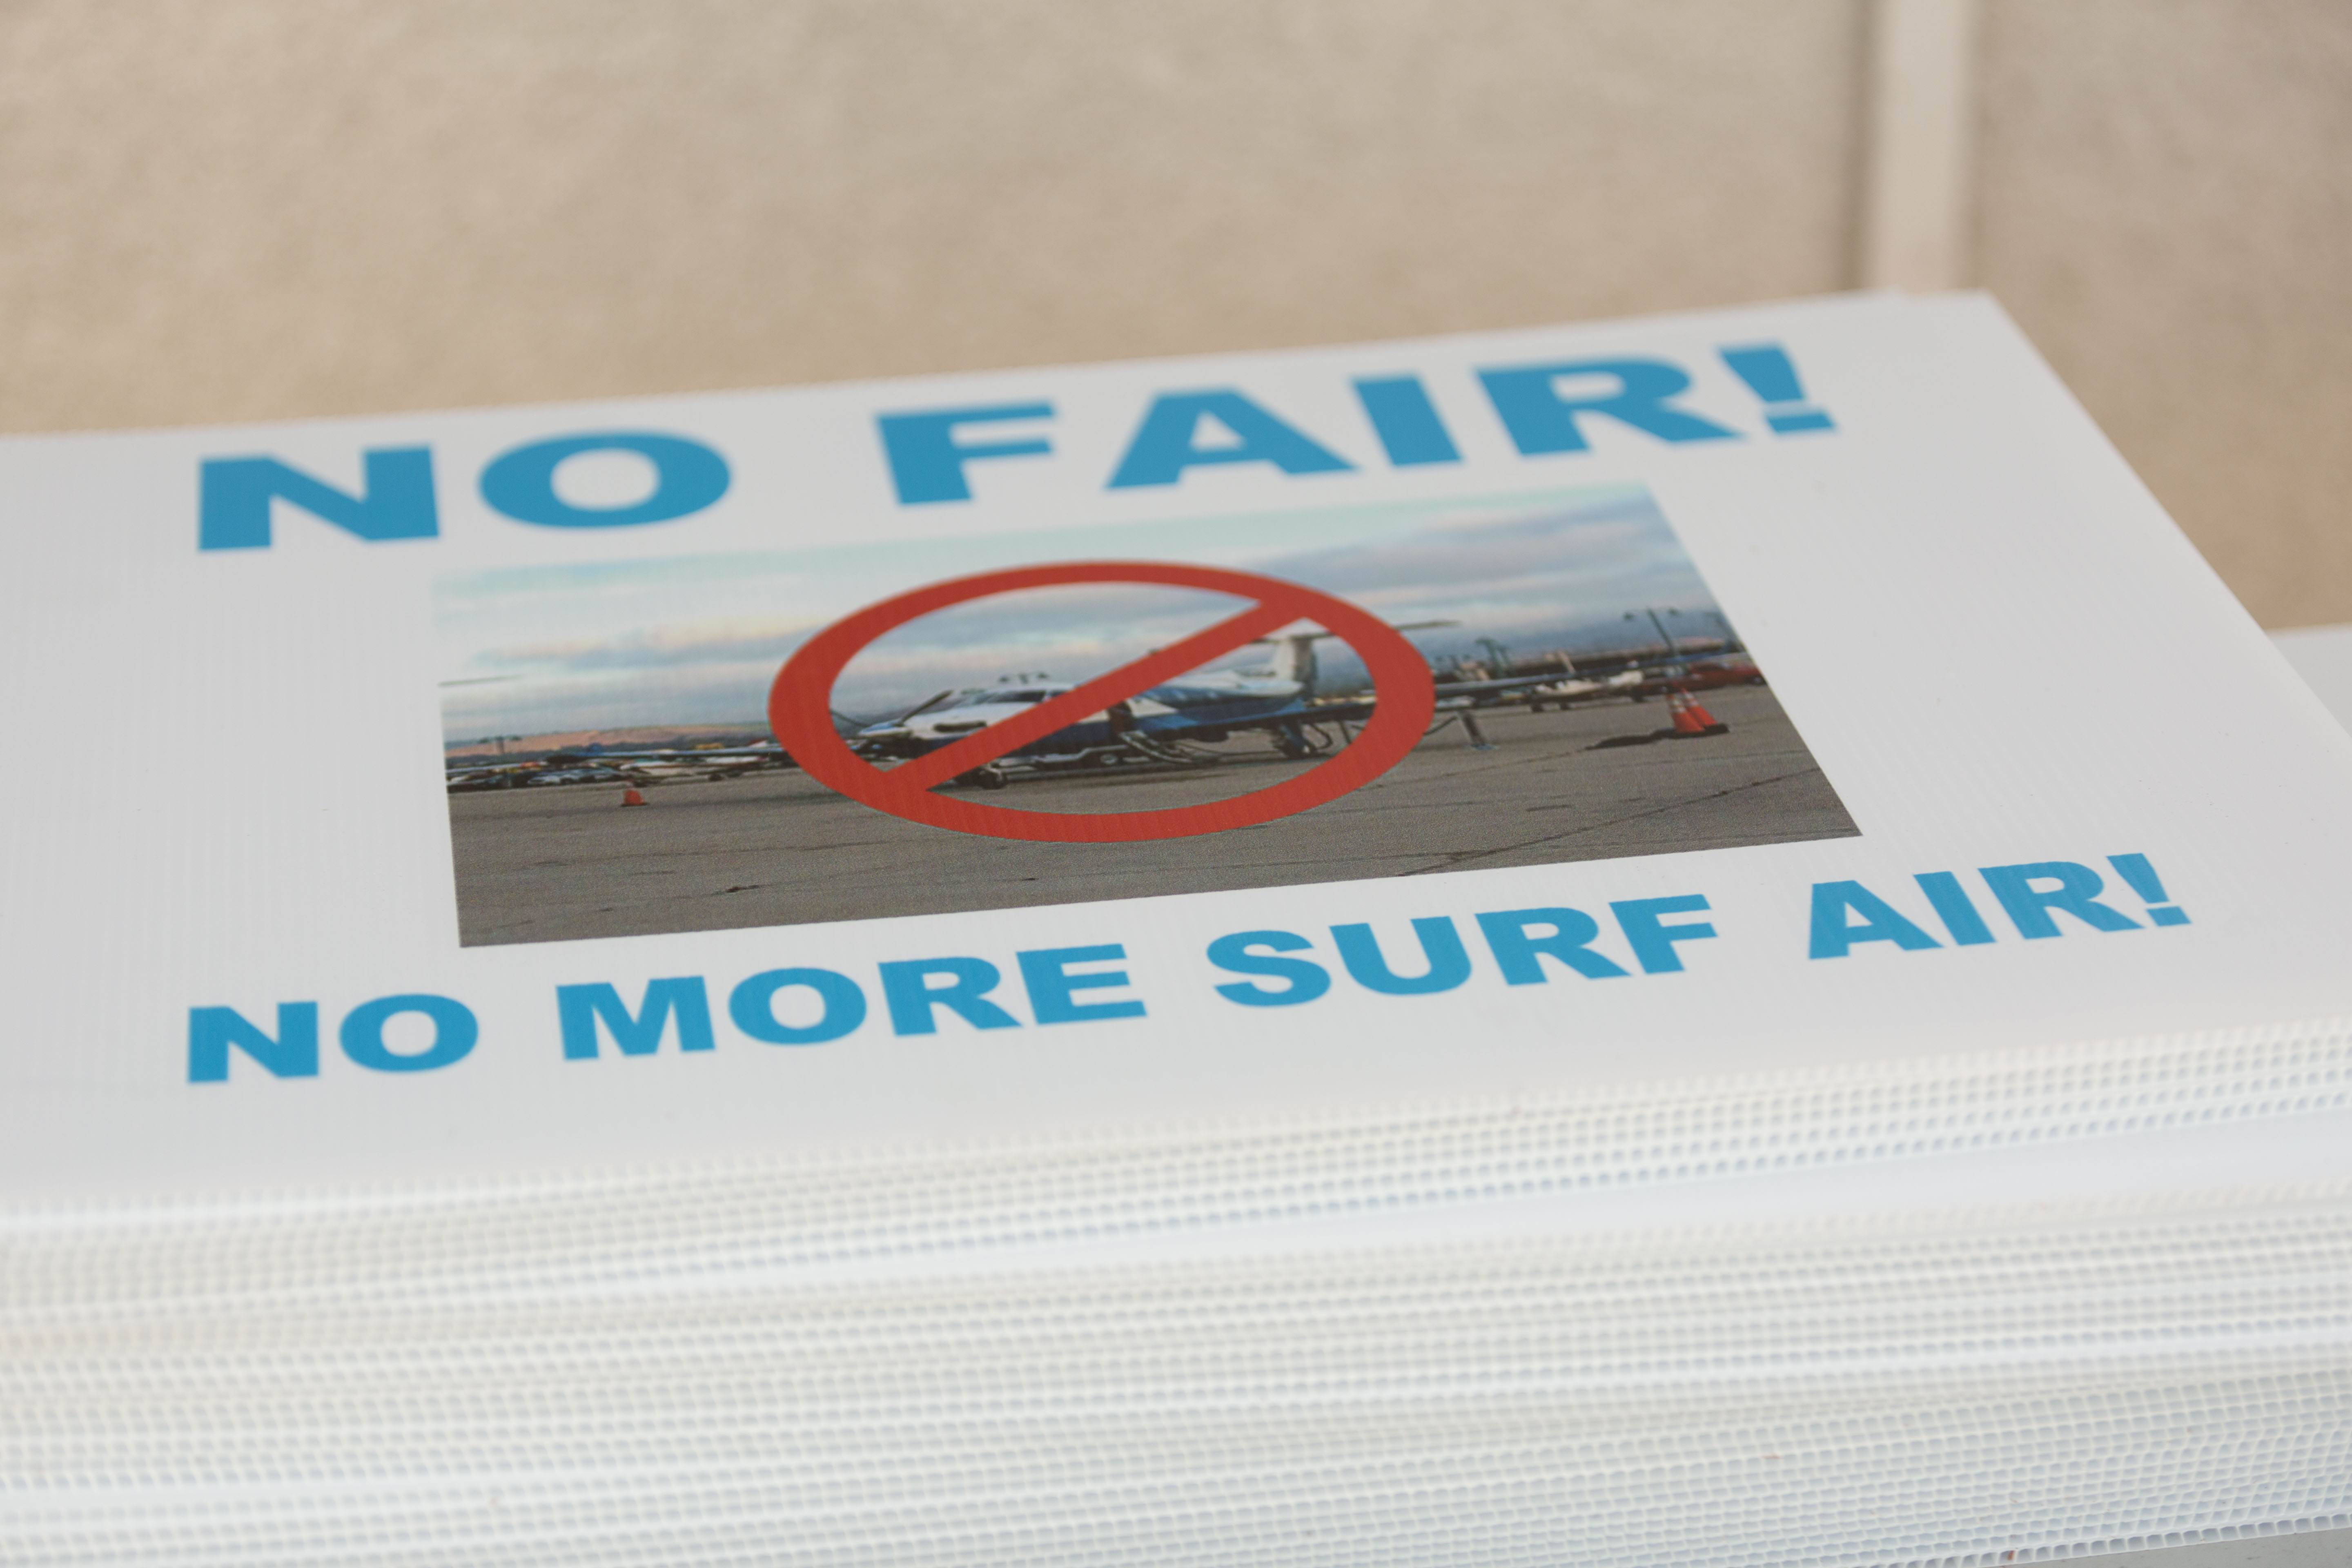 Surf Air Protest signs at San Carlos Airport (KSQL) in the San Francisco Bay Area on June 17th, 2017